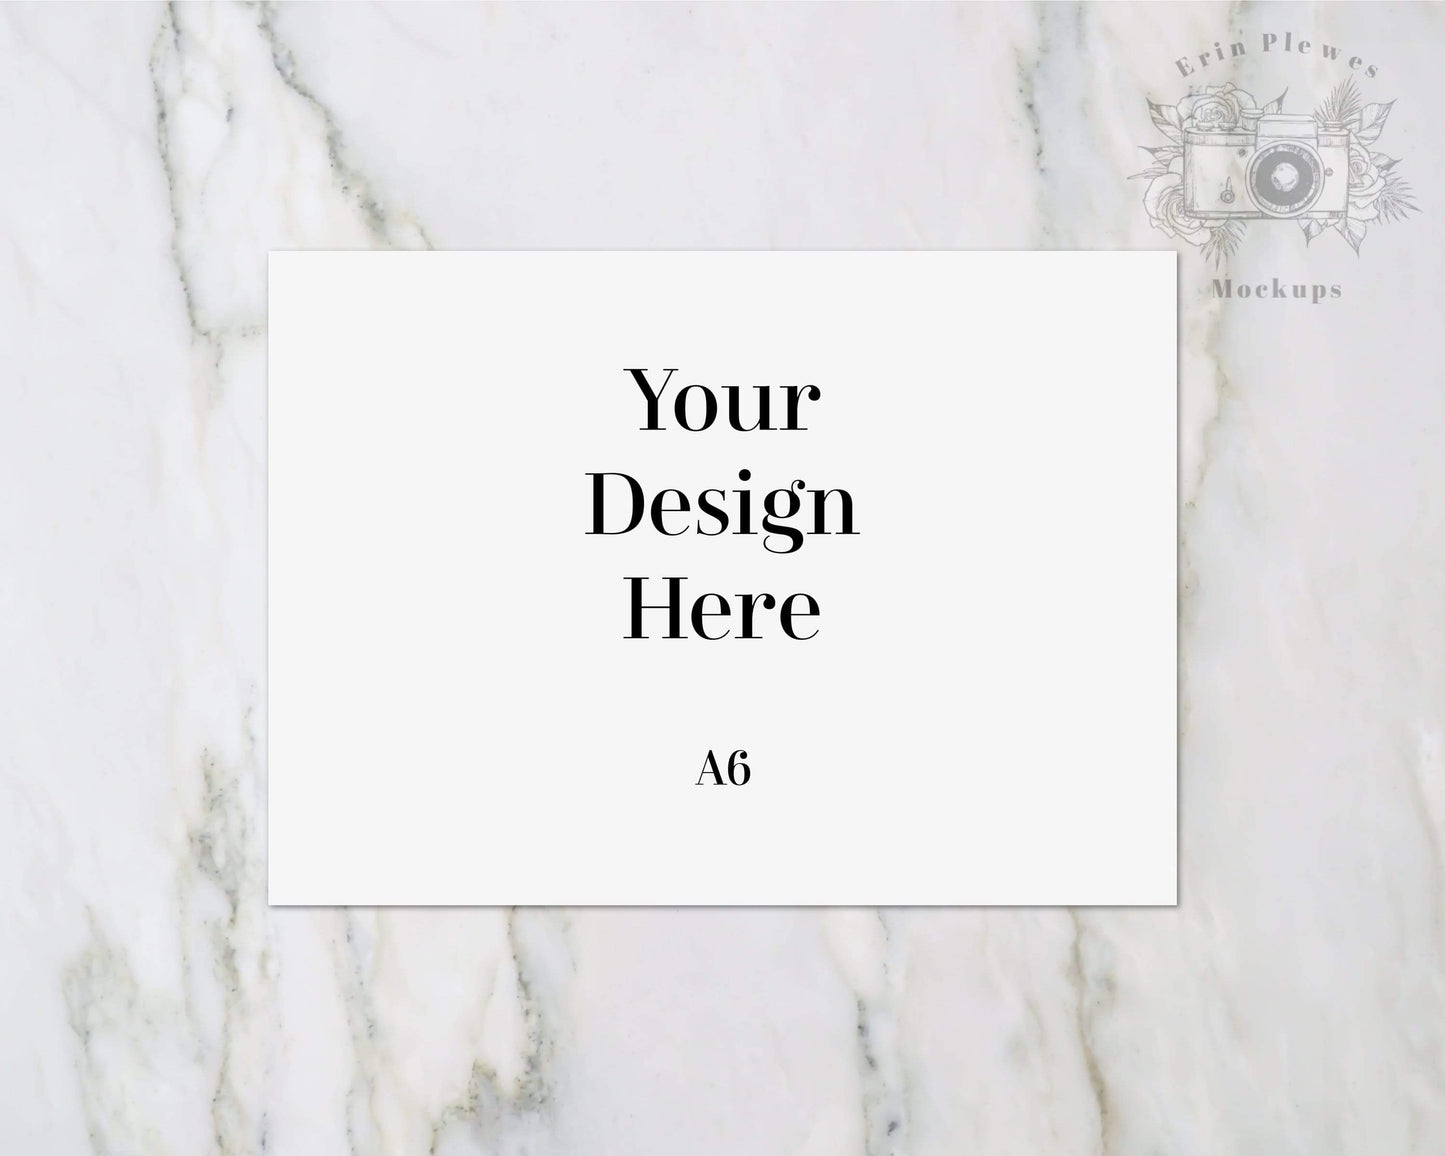 Erin Plewes Mockups A6 Card Mockup, Greeting Card Mock Up, Thank You Note Flatlay for wedding  on marble, Minimalist paper mock-up, Digital Download Template